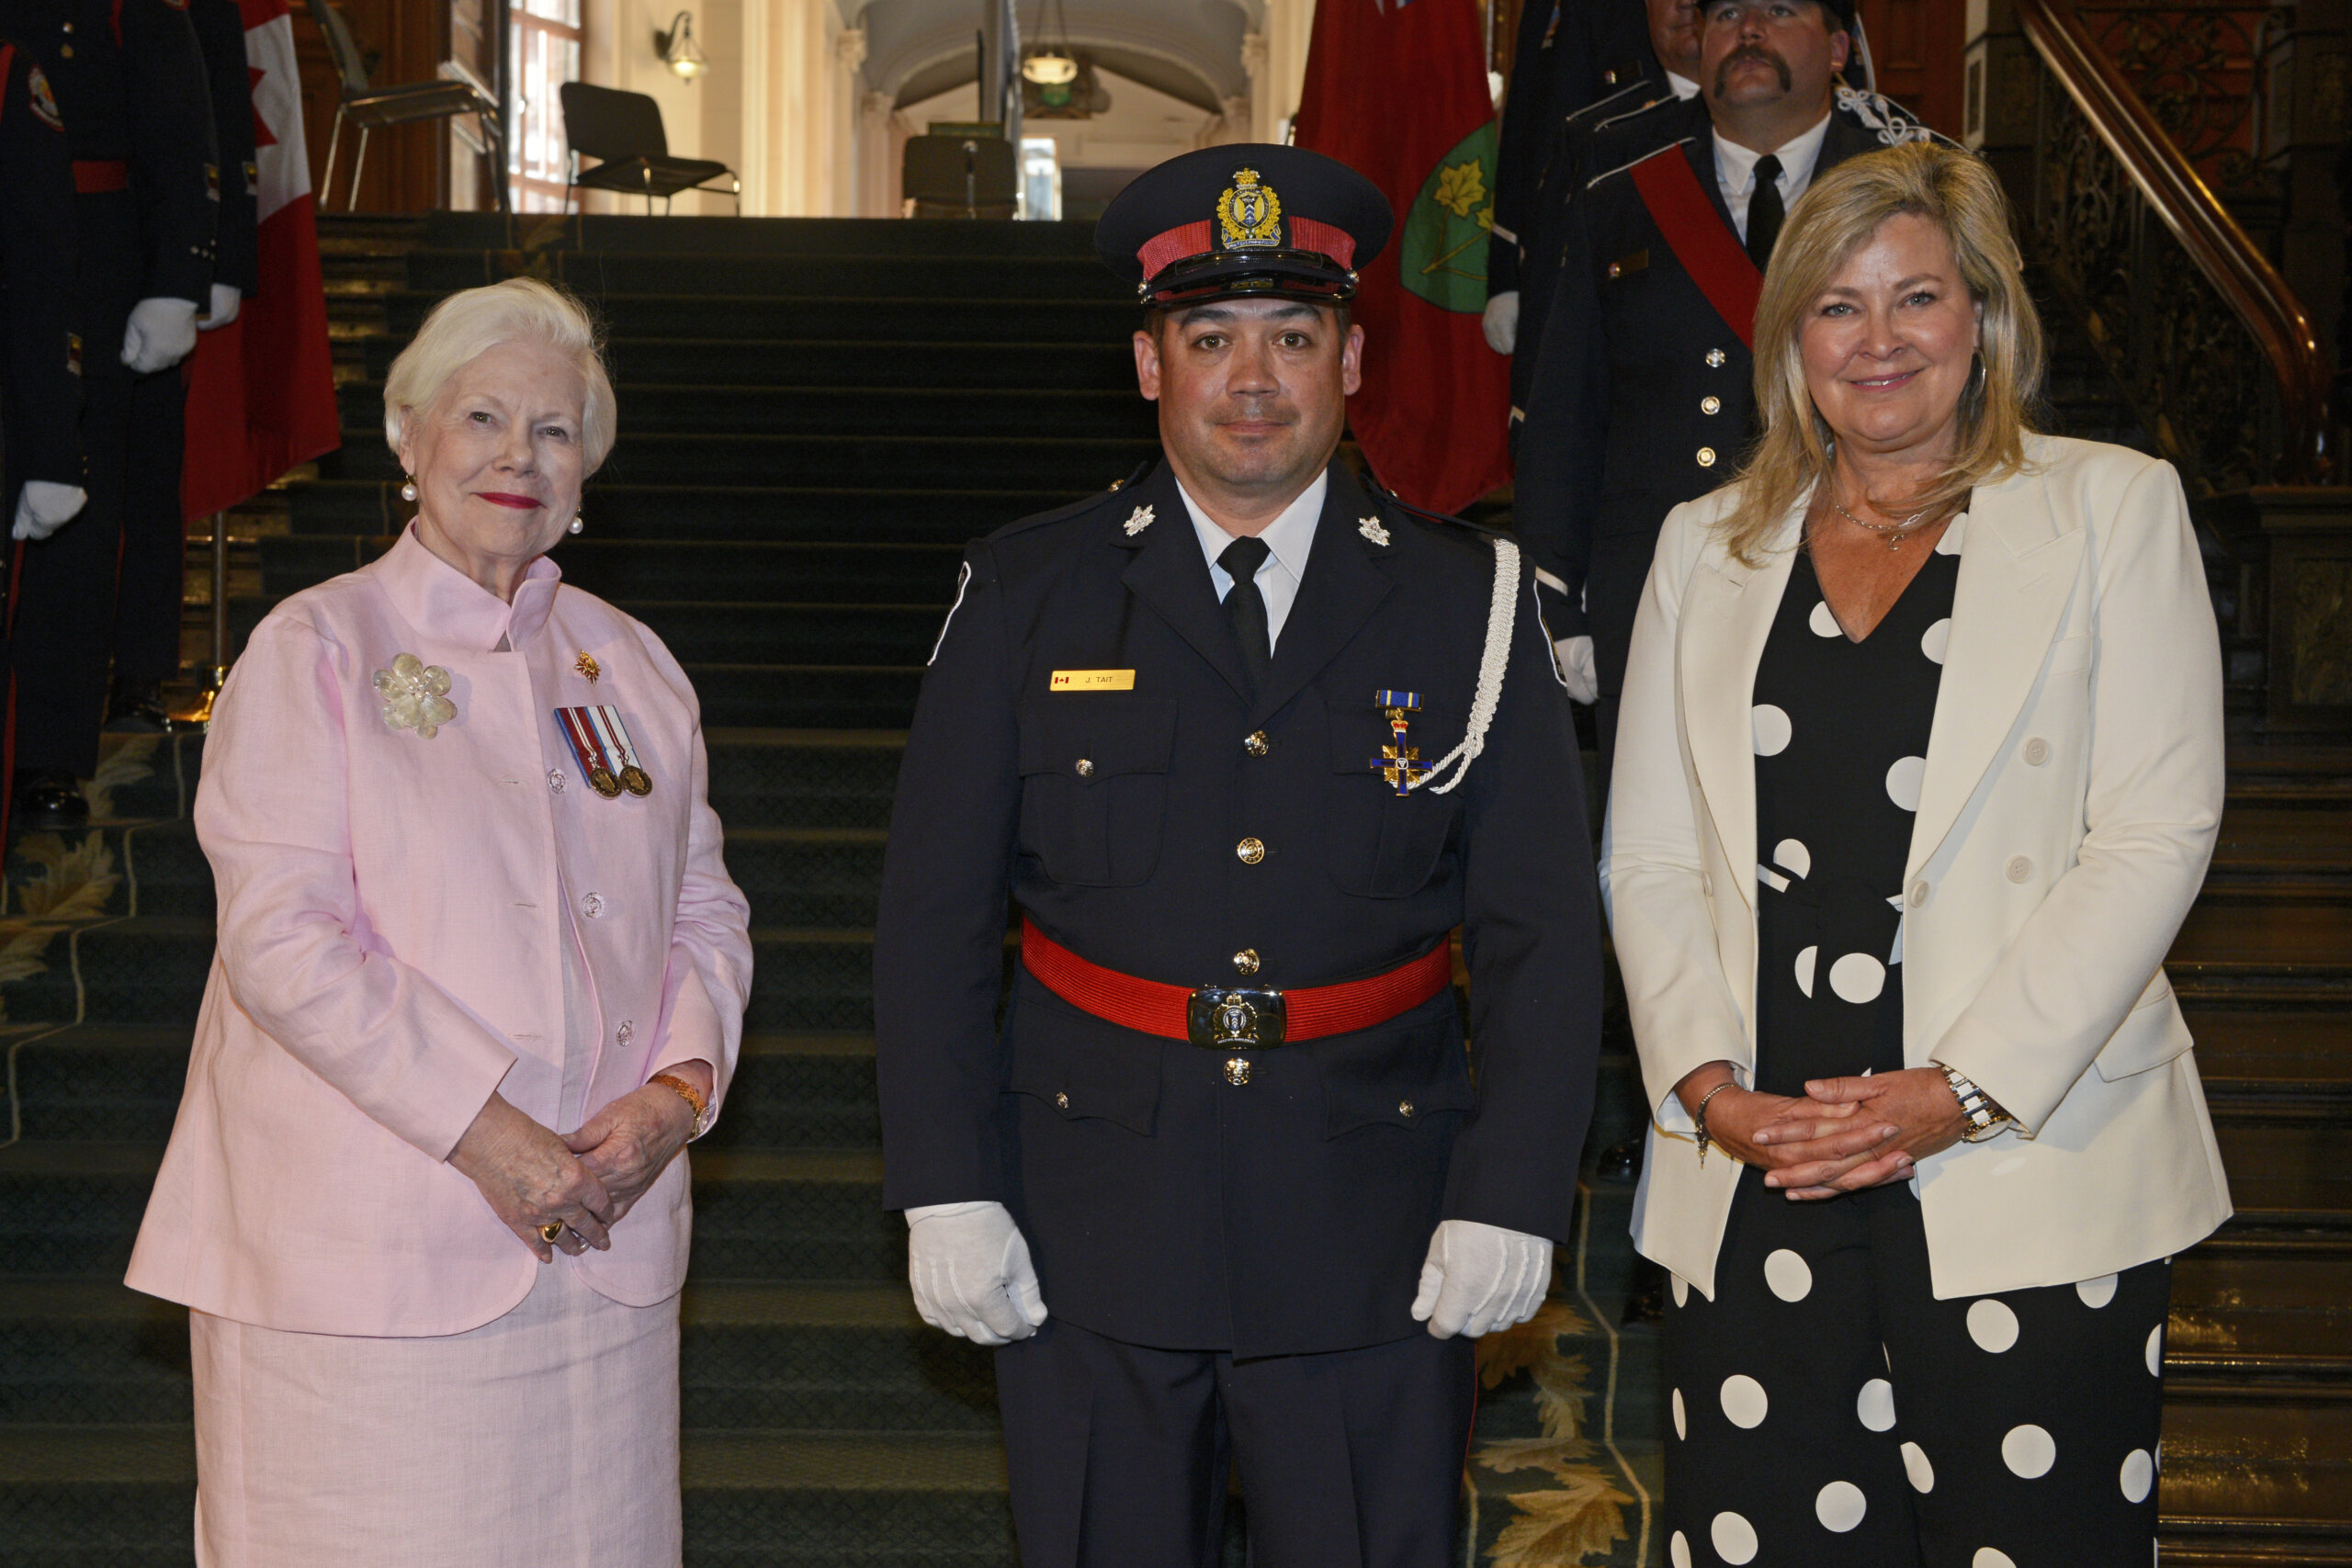 Left to right: The Honourable Elizabeth Dowdeswell, Constable Jeff Tait, and Christine Hogarth, Ontario’s Parliamentary Assistant to the Solicitor General